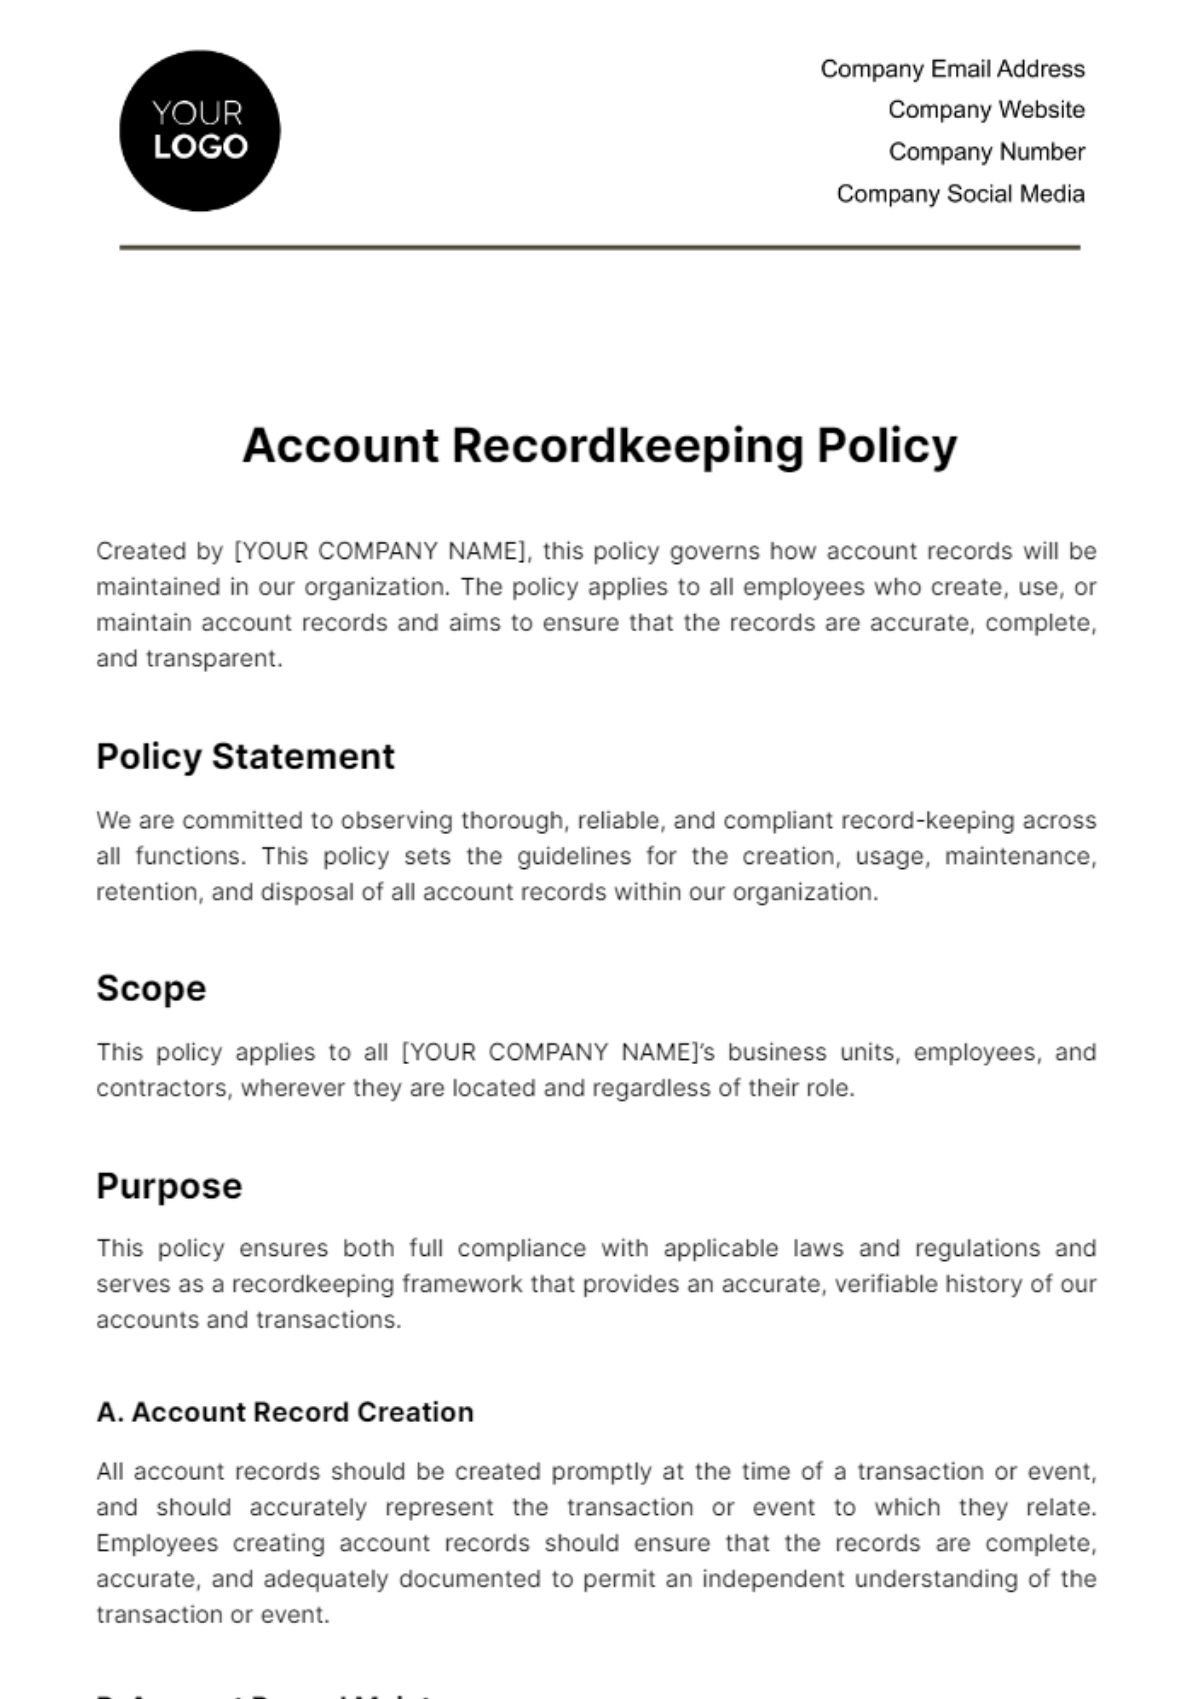 Account Recordkeeping Policy Template